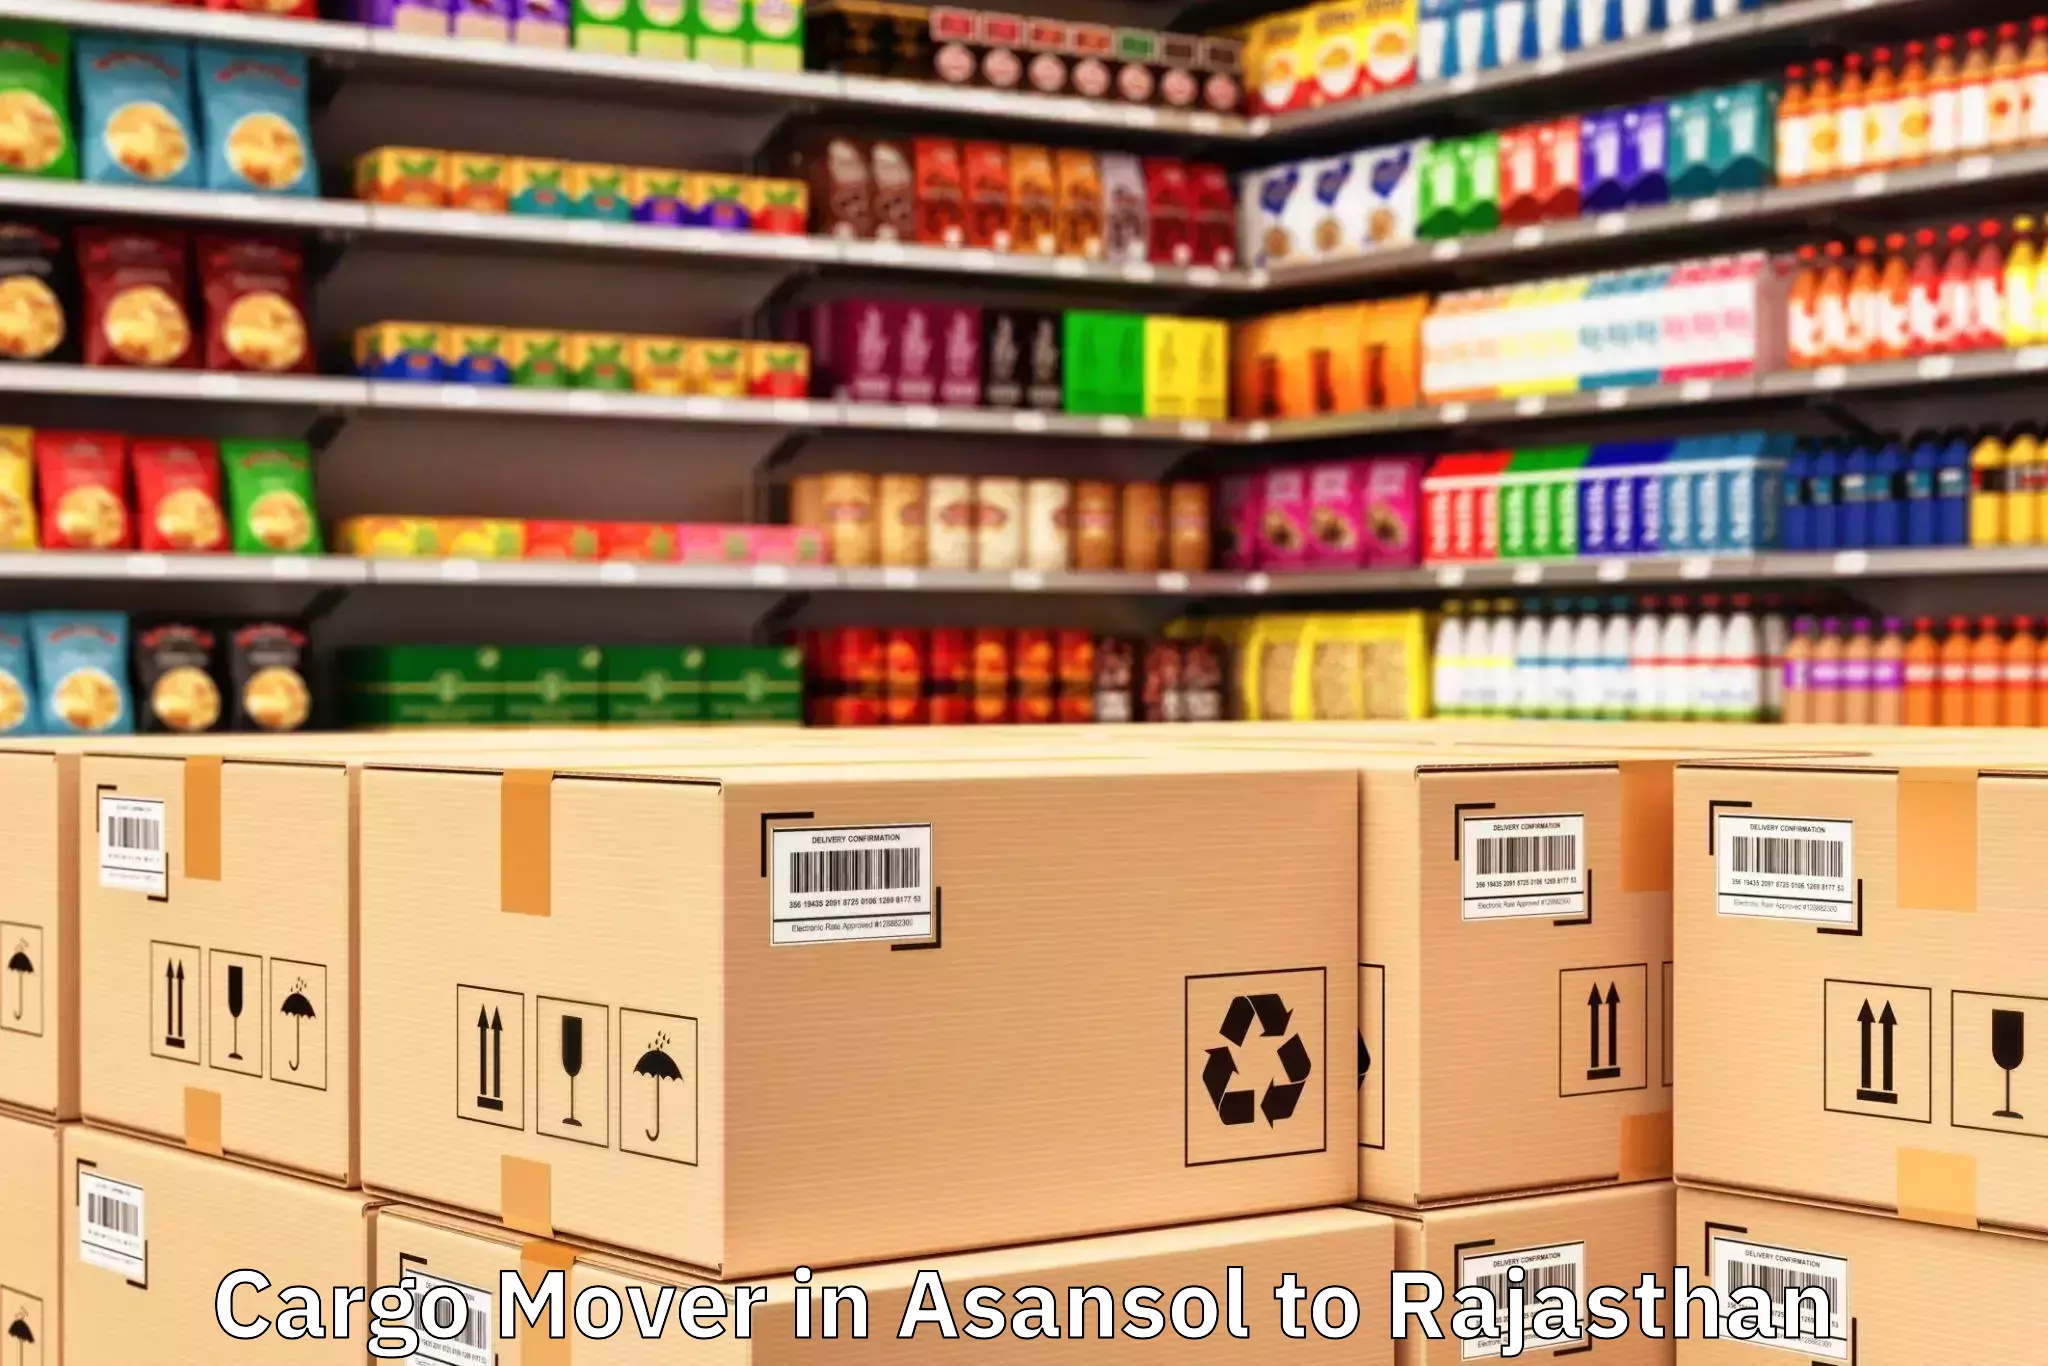 Discover Asansol to Rajasthan Cargo Mover